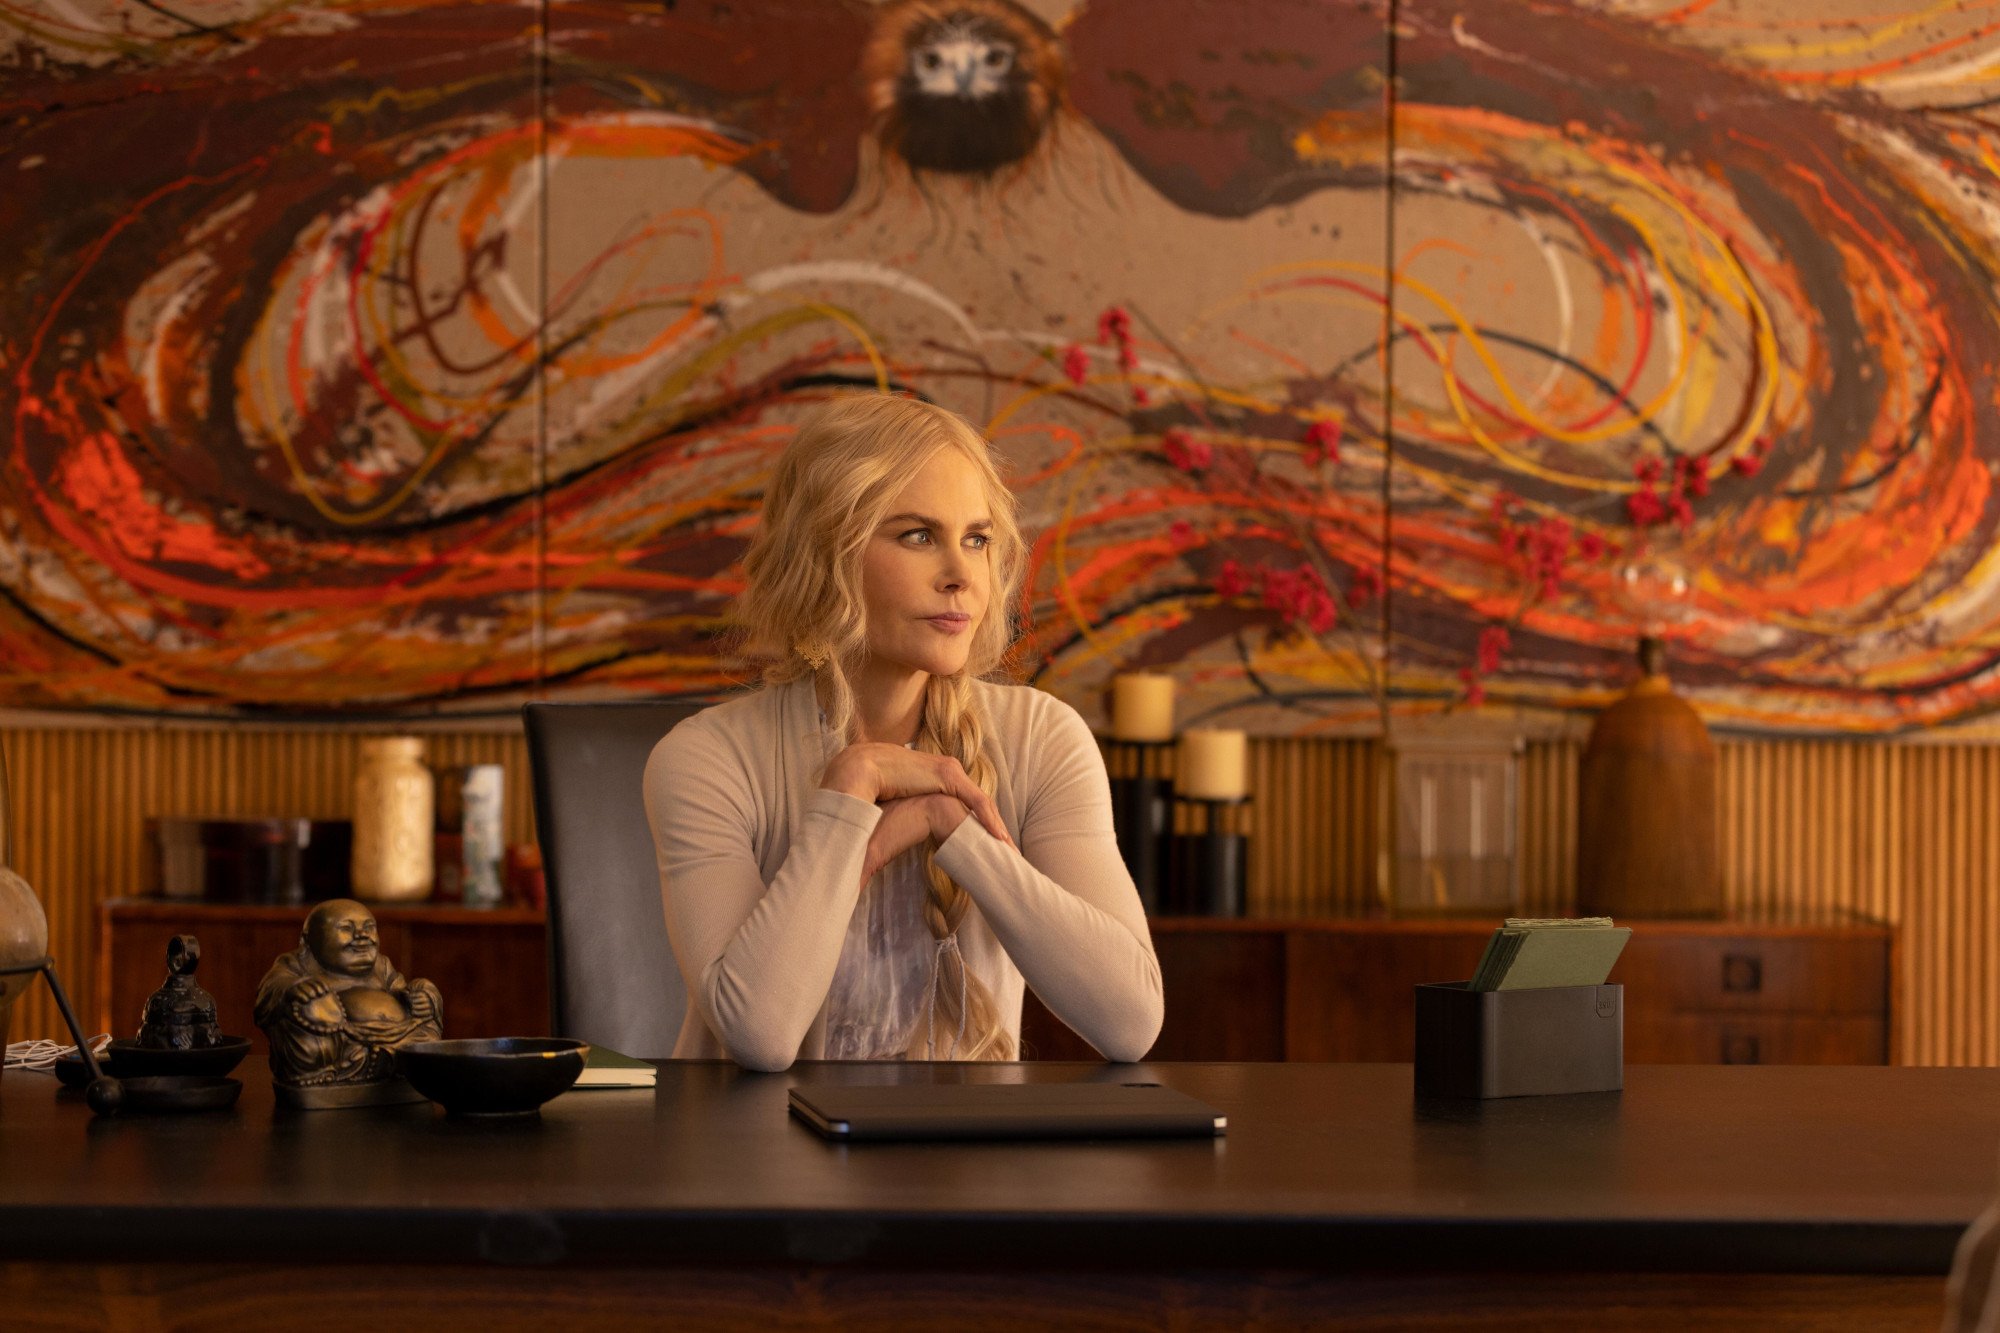 Nicole Kidman as Masha in Hulu's Nine Perfect Strangers. She's sitting at a desk with her hands clasped together, and she's looking sideways thinking. Fans have more than 1 theory about who's threatening her.